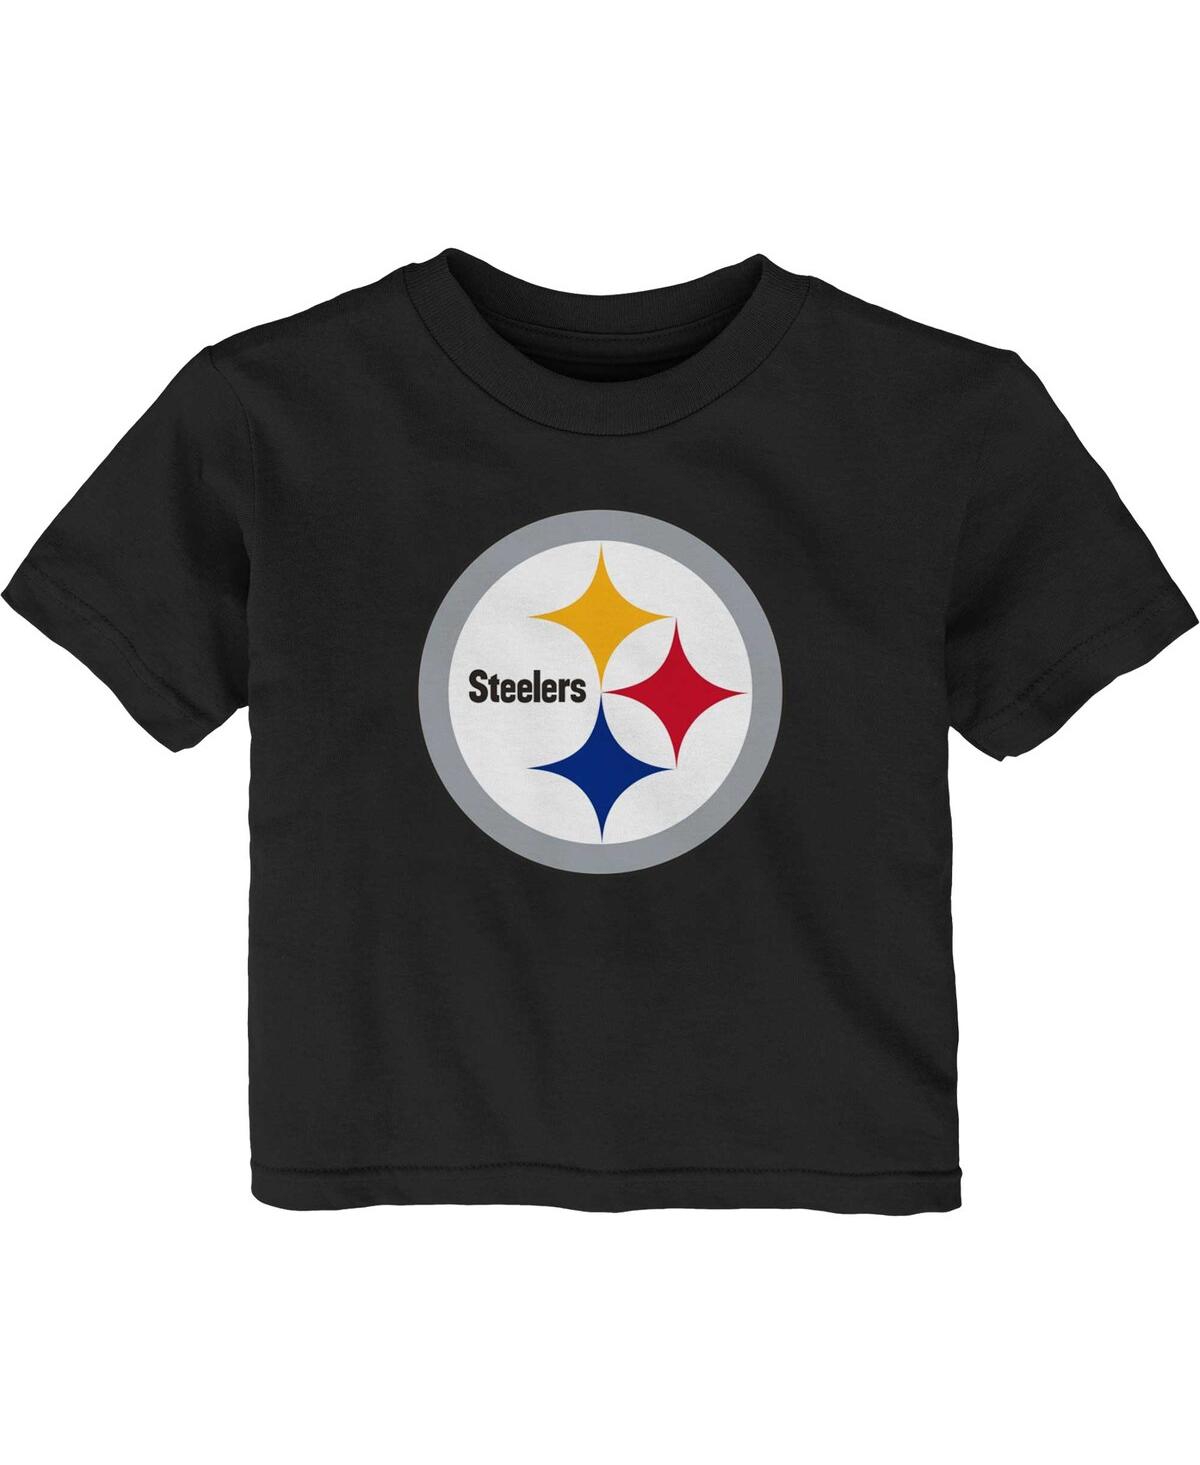 Outerstuff Baby Boys And Girls Black Pittsburgh Steelers Primary Logo T-shirt